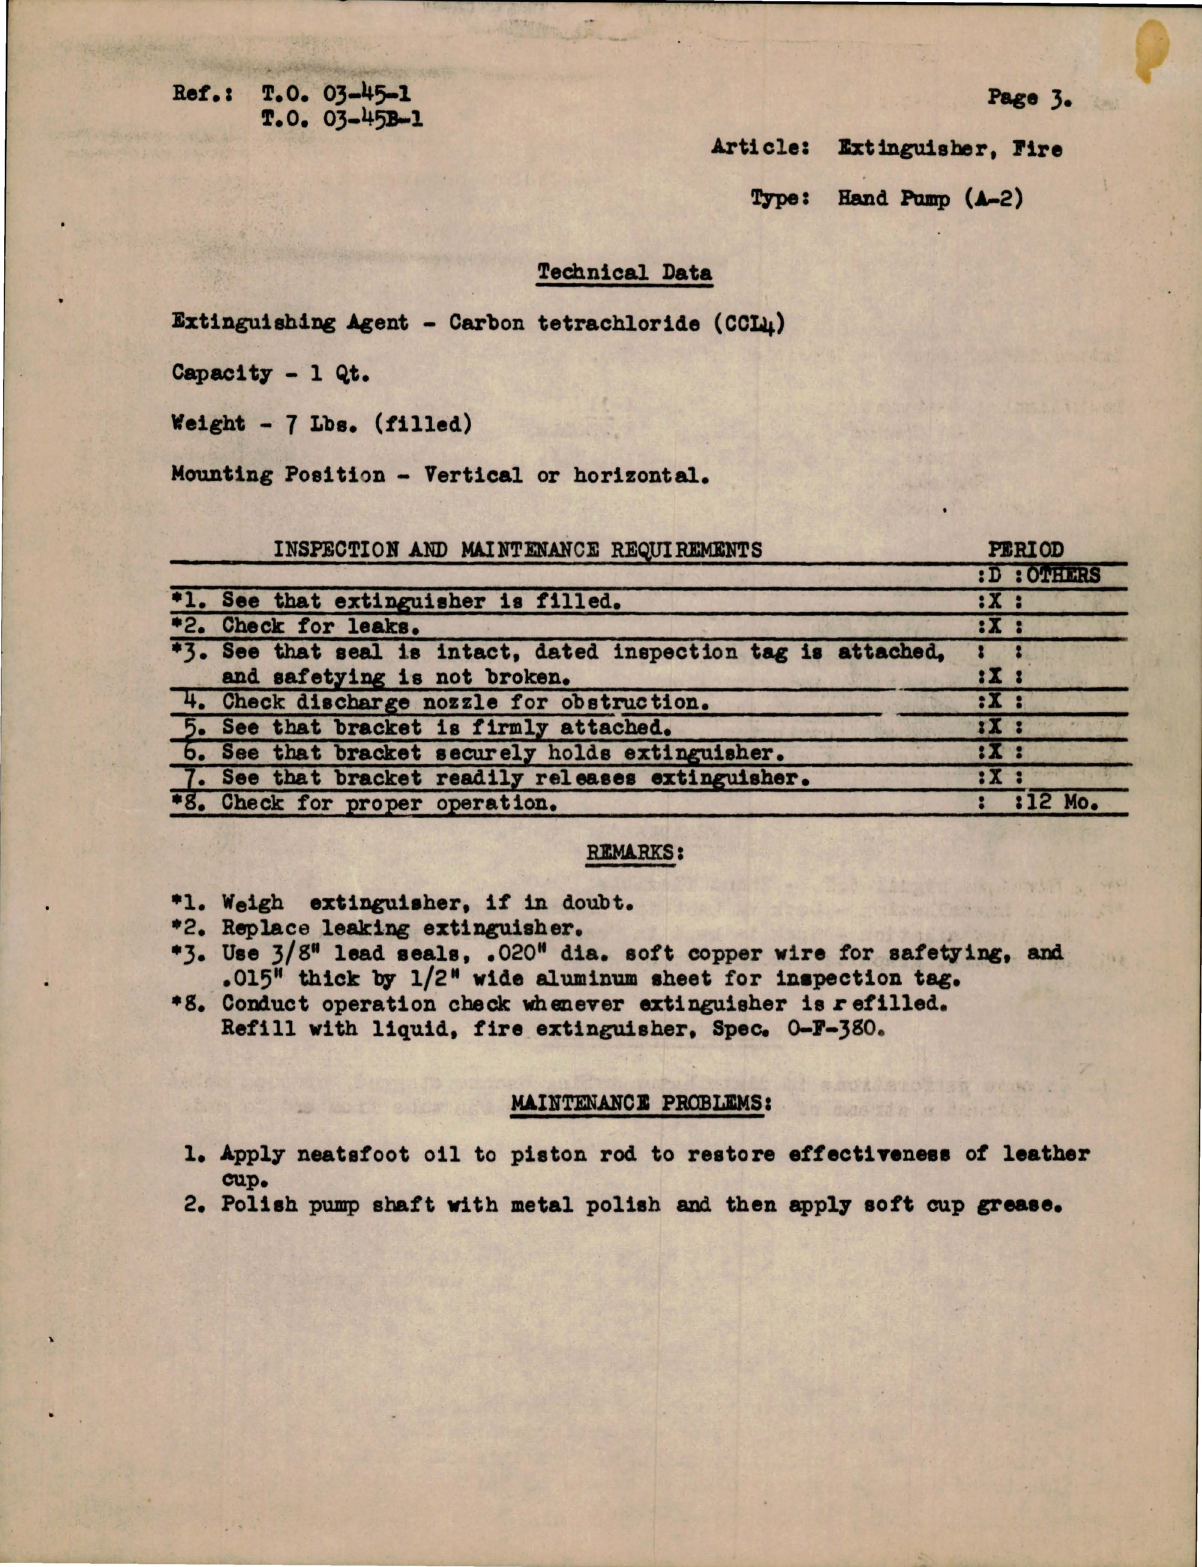 Sample page 5 from AirCorps Library document: Air Corps Technical Schools - Maintenance and Inspection Guide - Hydraulic Systems & Miscellaneous Equipment